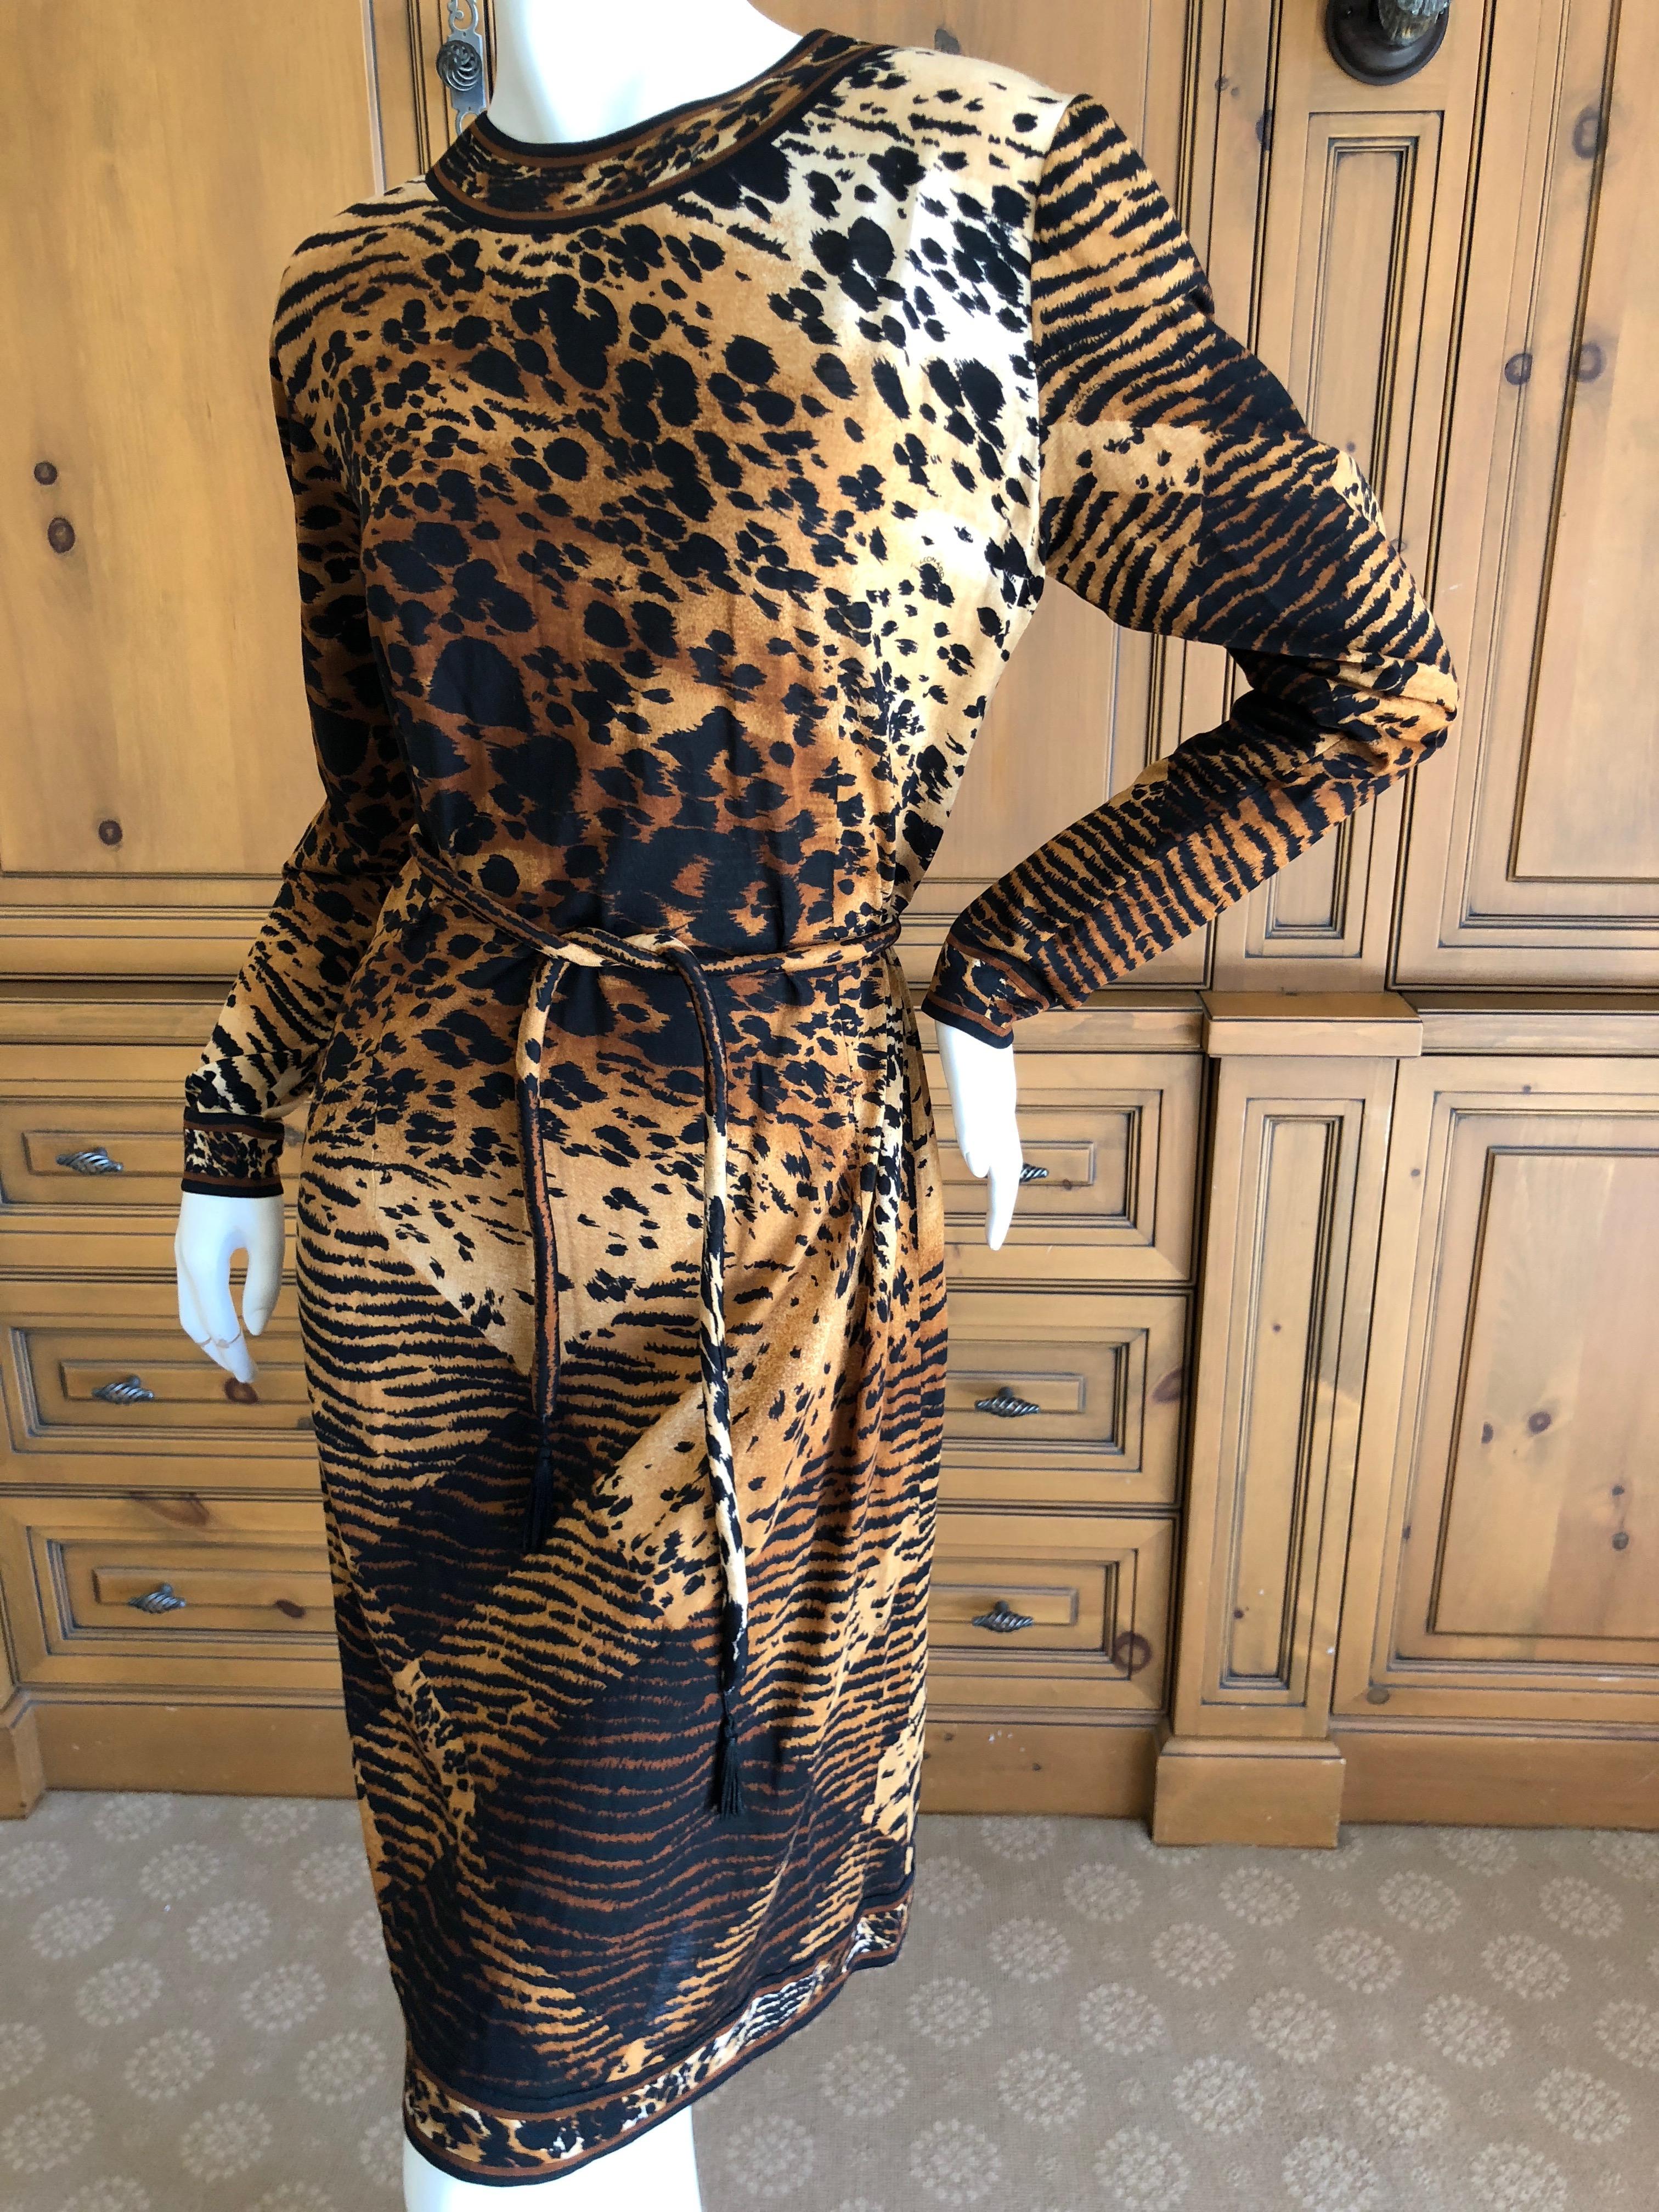 Leonard Paris for Bergdorf Goodman 1970's Wool / Silk Dress.
Leonard , Paris was a contemporary of Pucci, using silk jersey printed in their signature florals, Leonard was as expensive, if not more, than Pucci.
70 % wool 30% silk
Bust 40